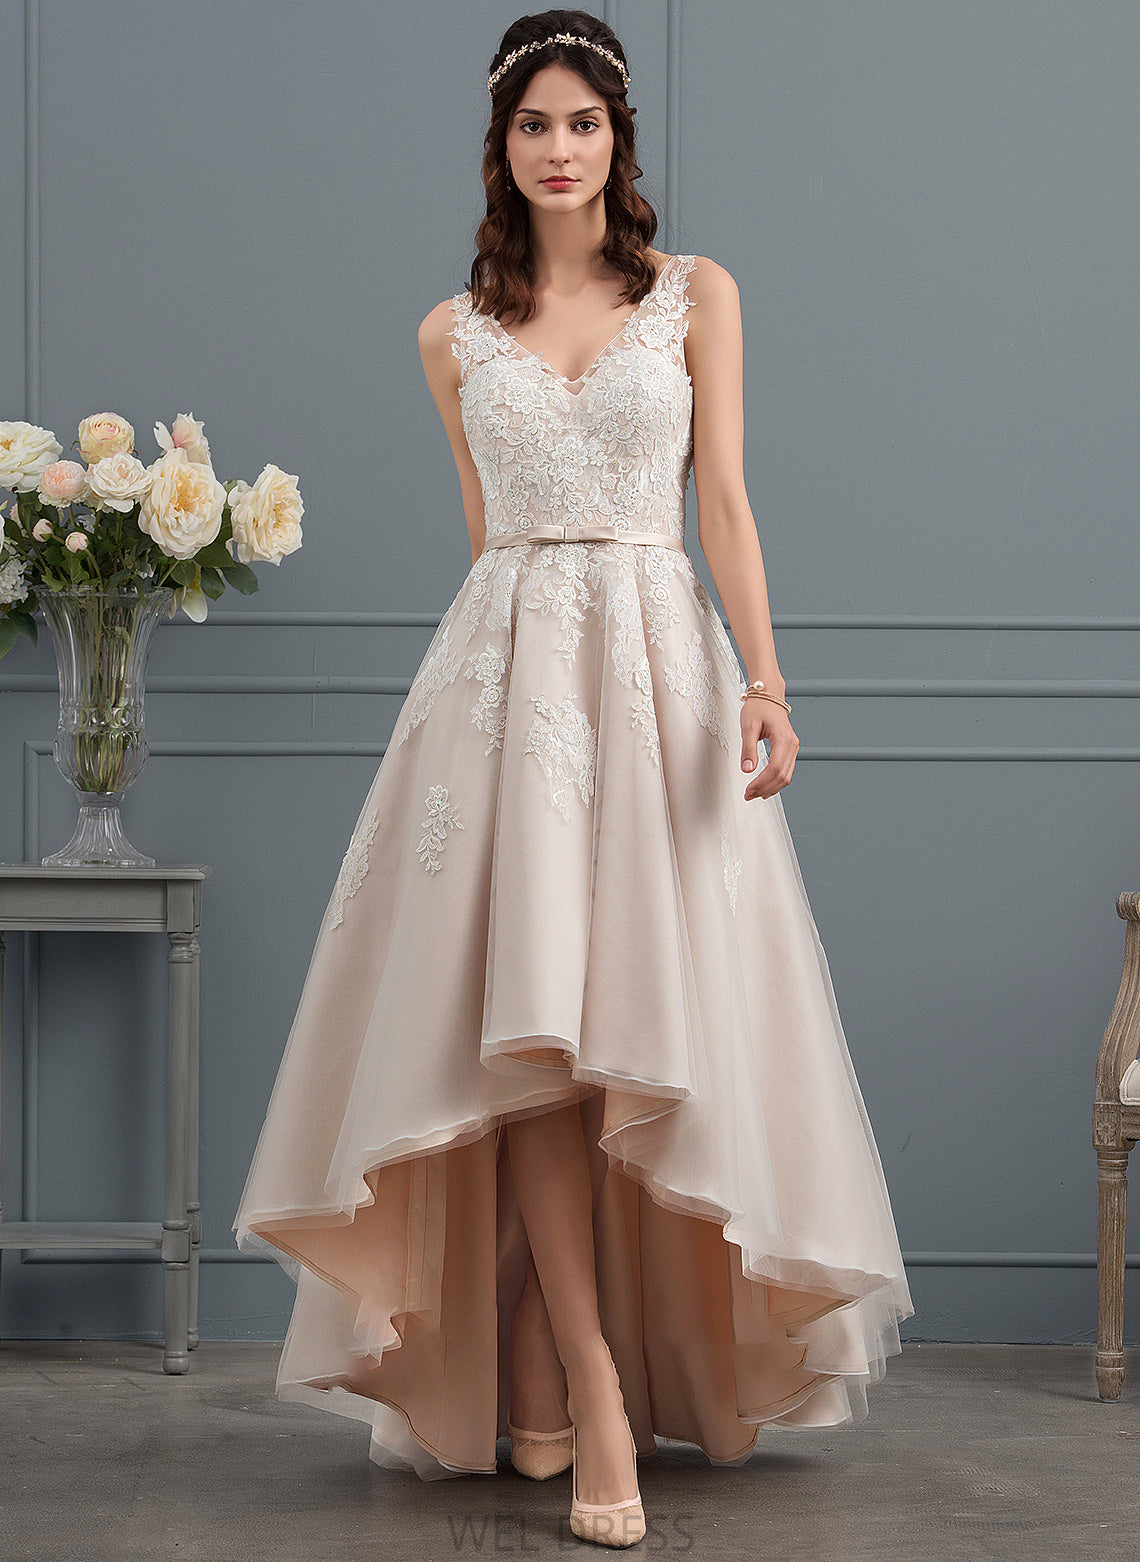 Wedding Lace Kelsie Dress Wedding Dresses V-neck A-Line Bow(s) Tulle With Asymmetrical